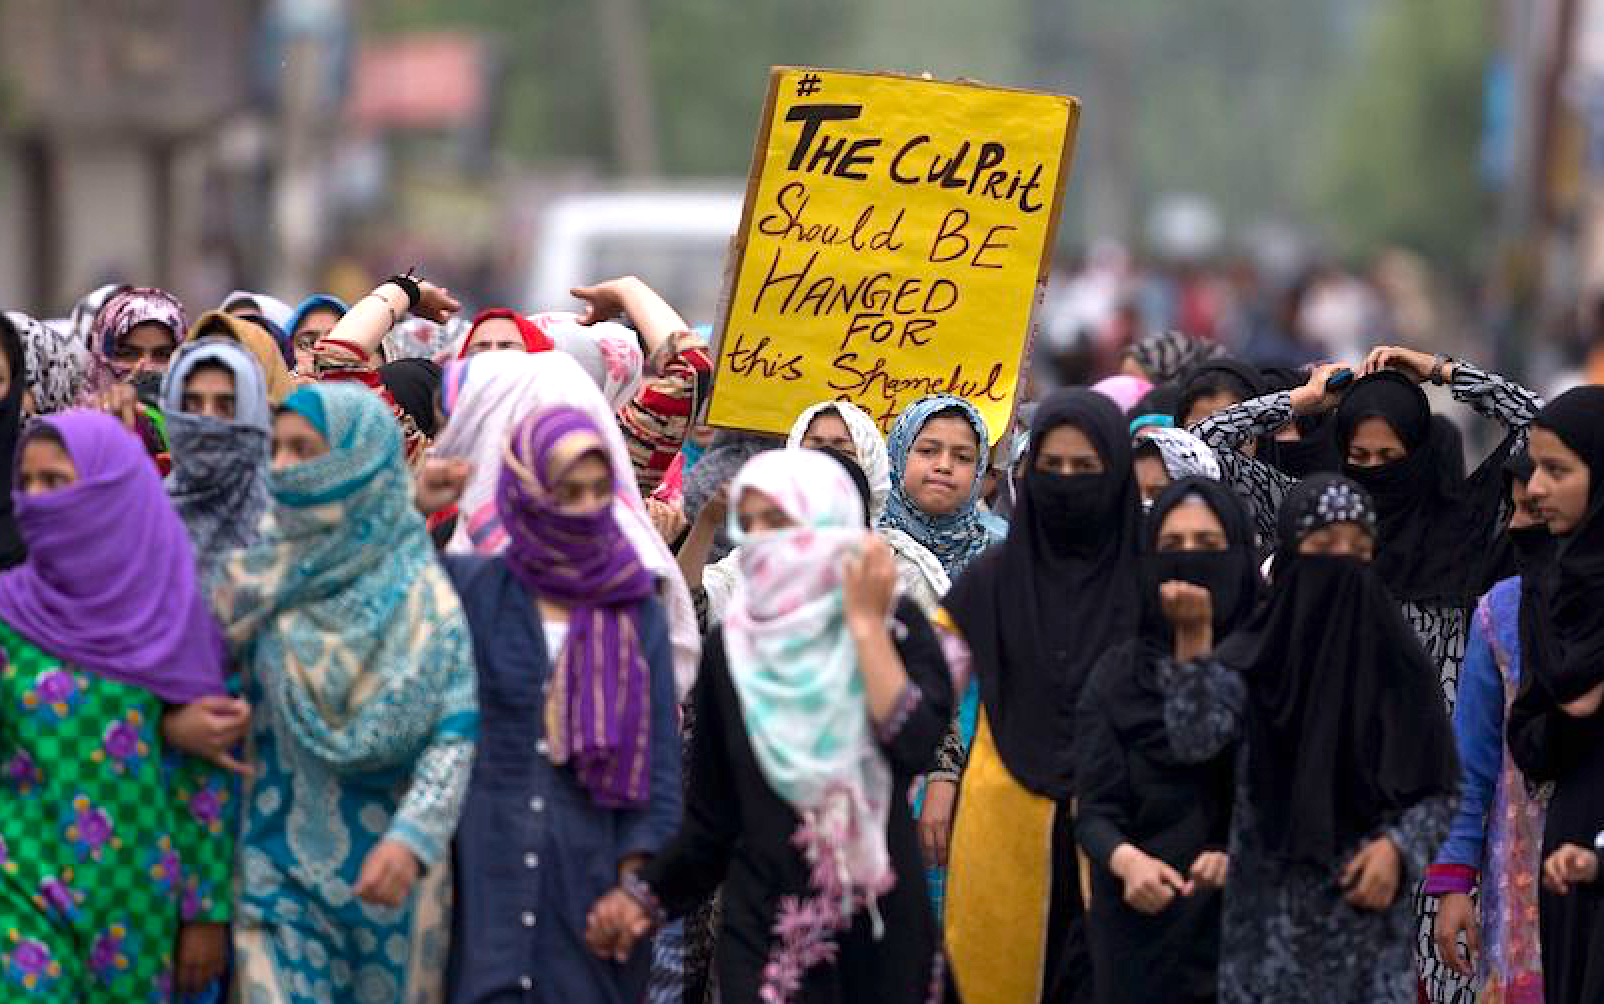 Bandipora child rape: Jammu & Kashmir governor orders fast-track probe as valley erupts in protests